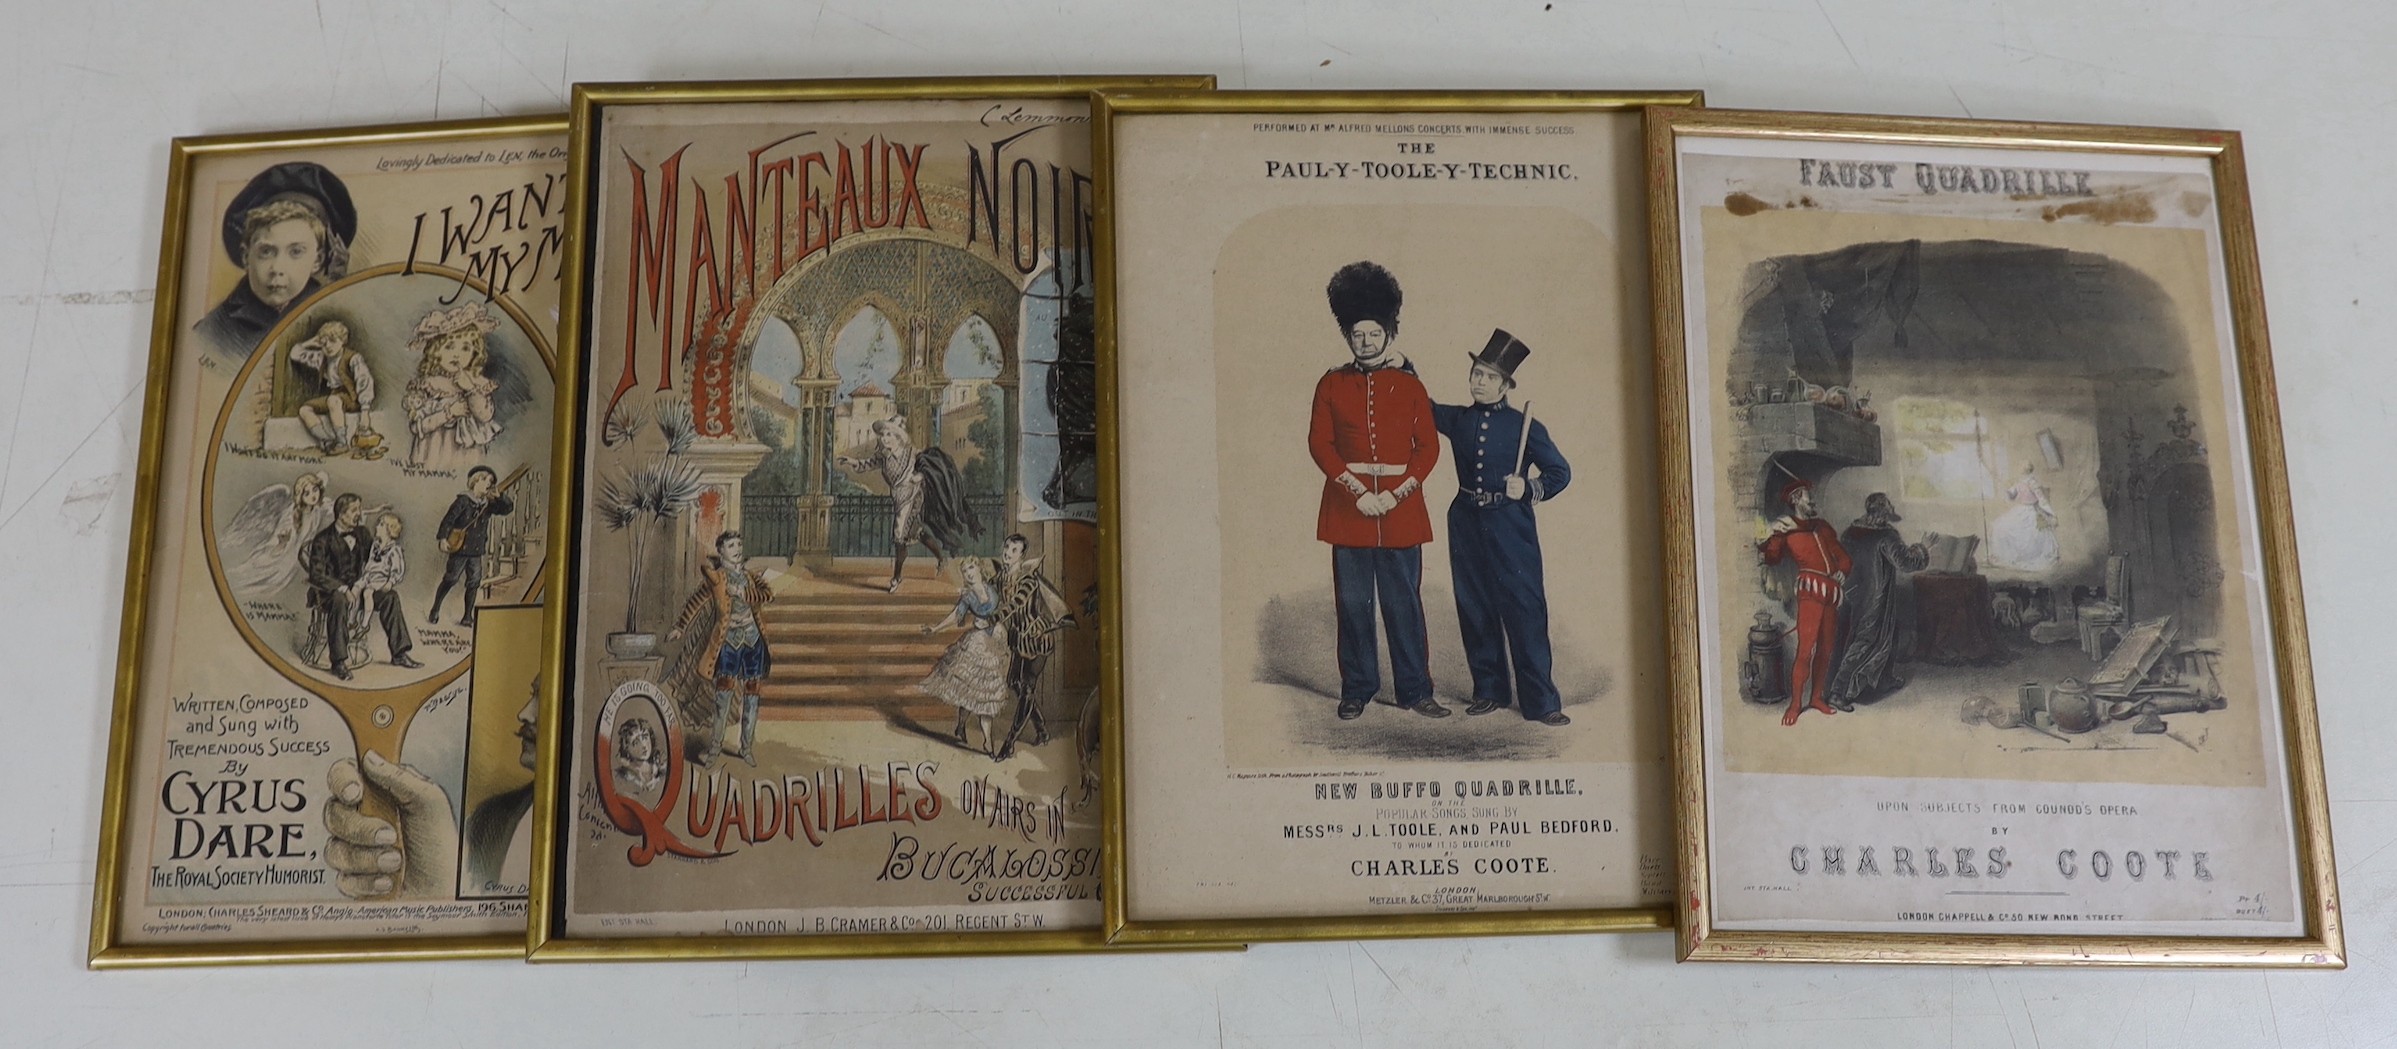 Four assorted Victorian music / play bills, Cyrus Dare 'I Want My Mumma', 'Manteaux Noirs', 'The Paul-Y-Toole-Why-Technic' and 'Faust Quadrille', approximately 33 x 24cm                                                   